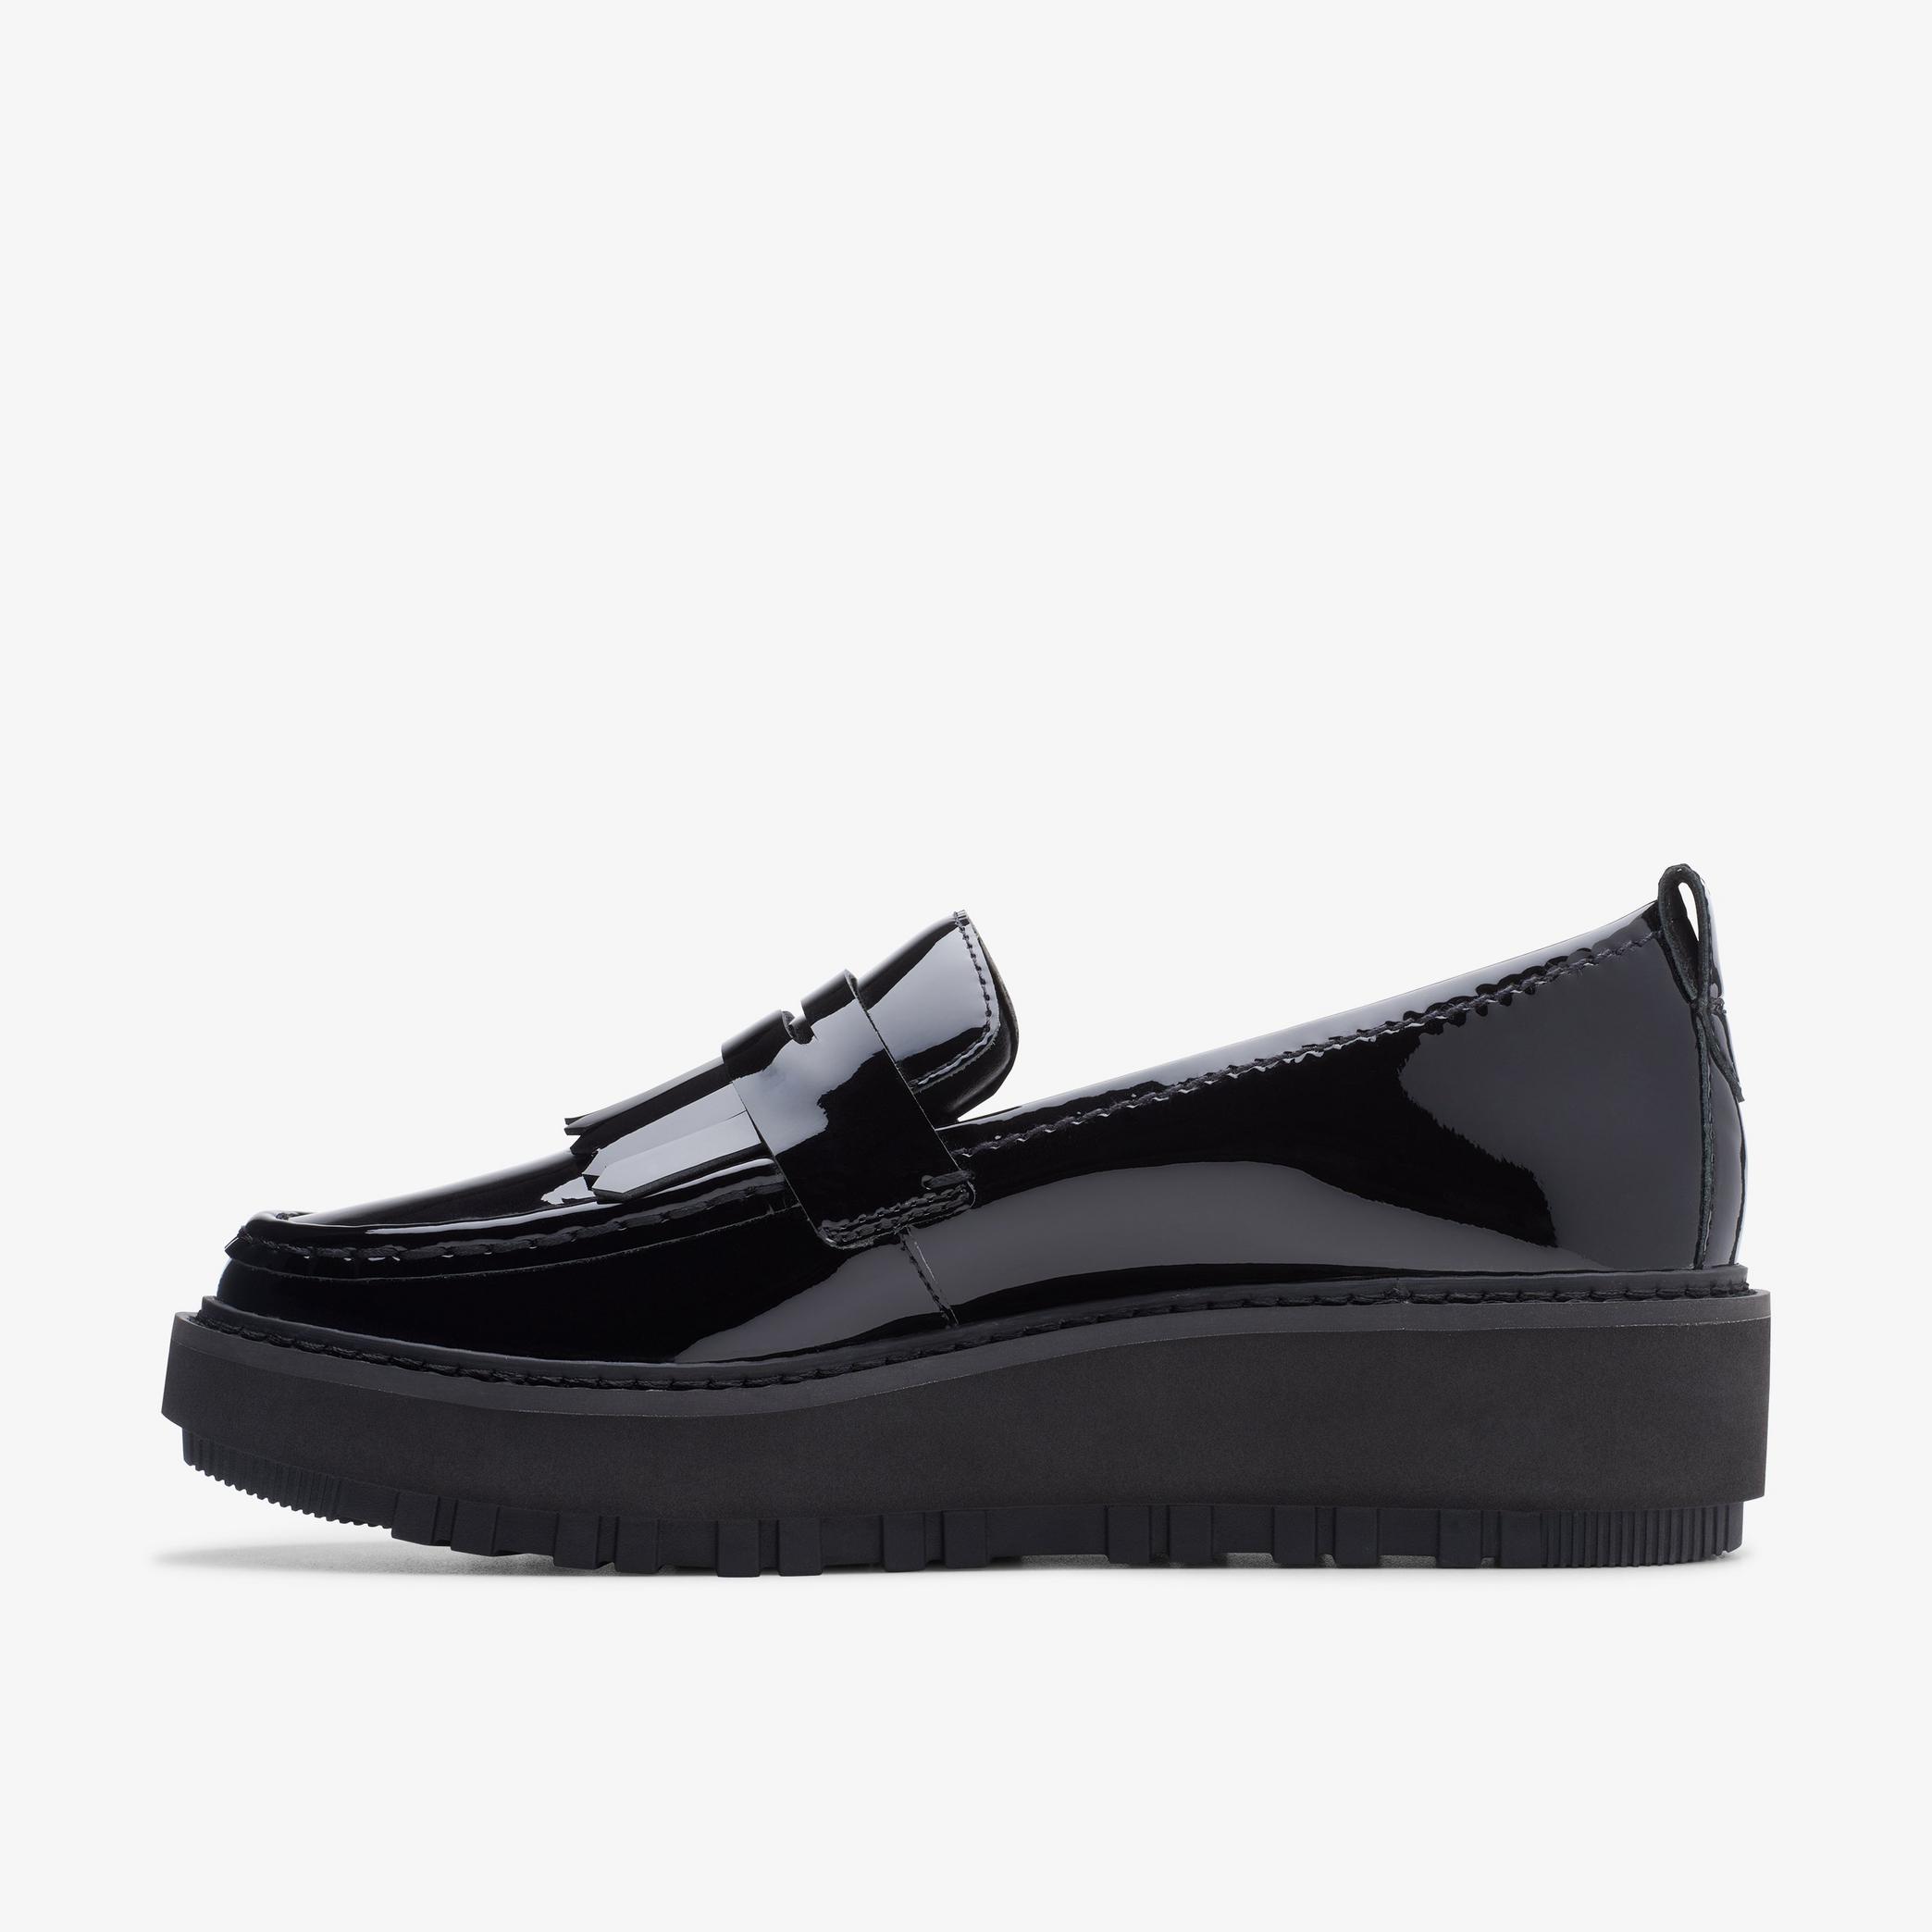 WOMENS Orianna Loafer Black Patent Leather Loafers | Clarks US